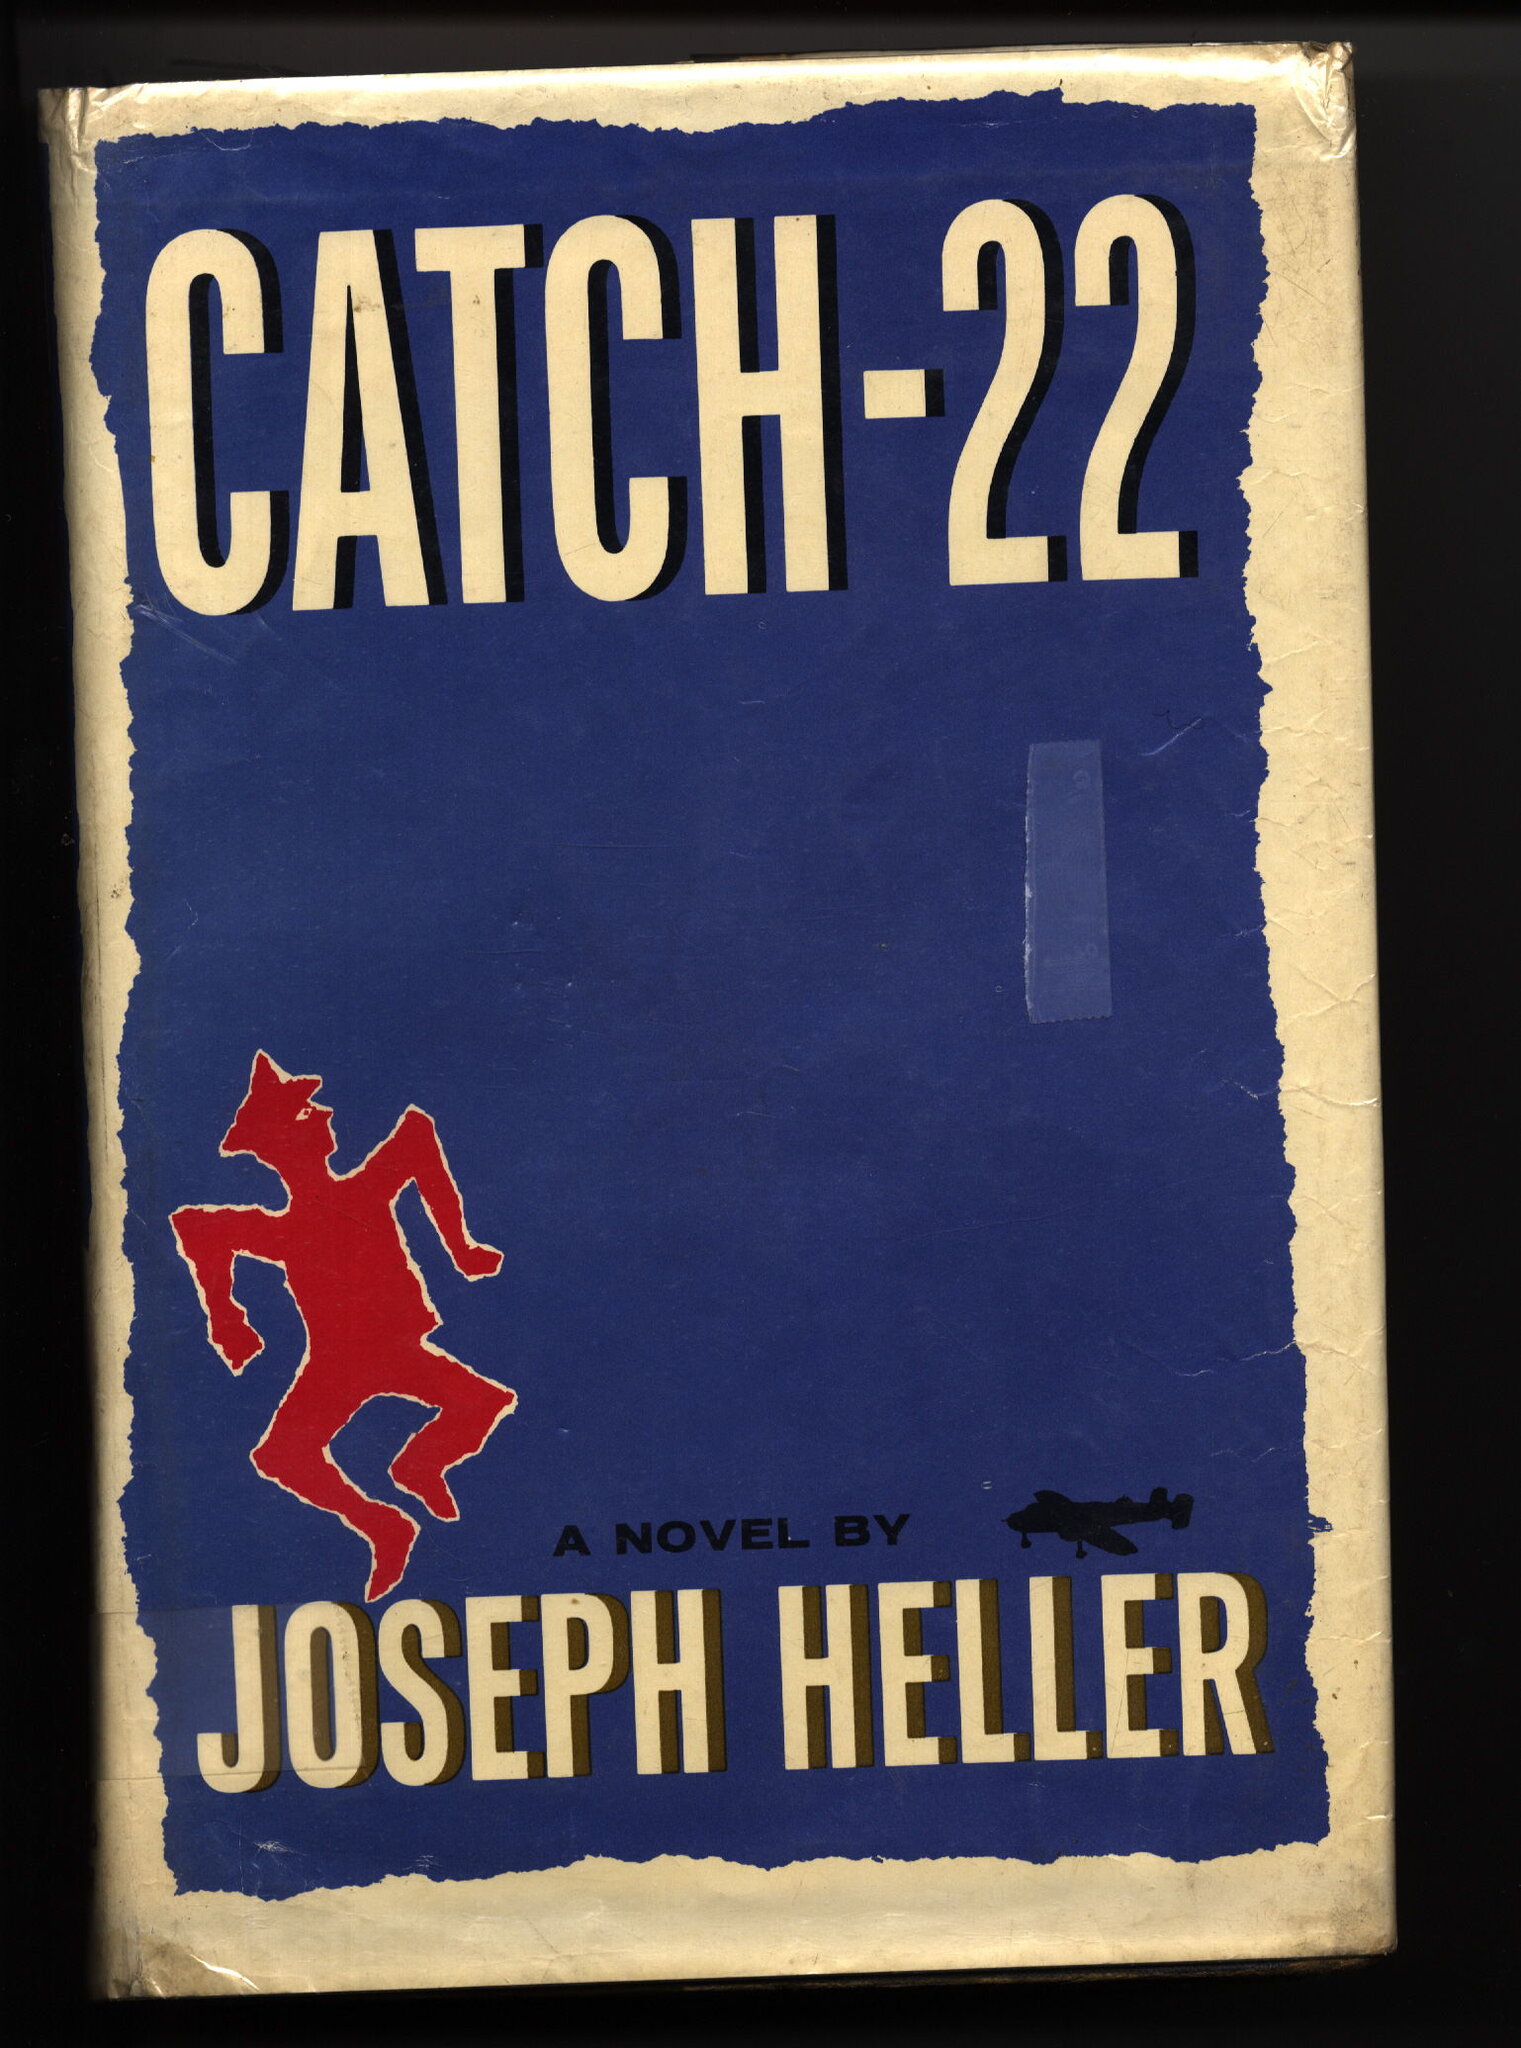 Interview: Checking In With Author Joseph Heller